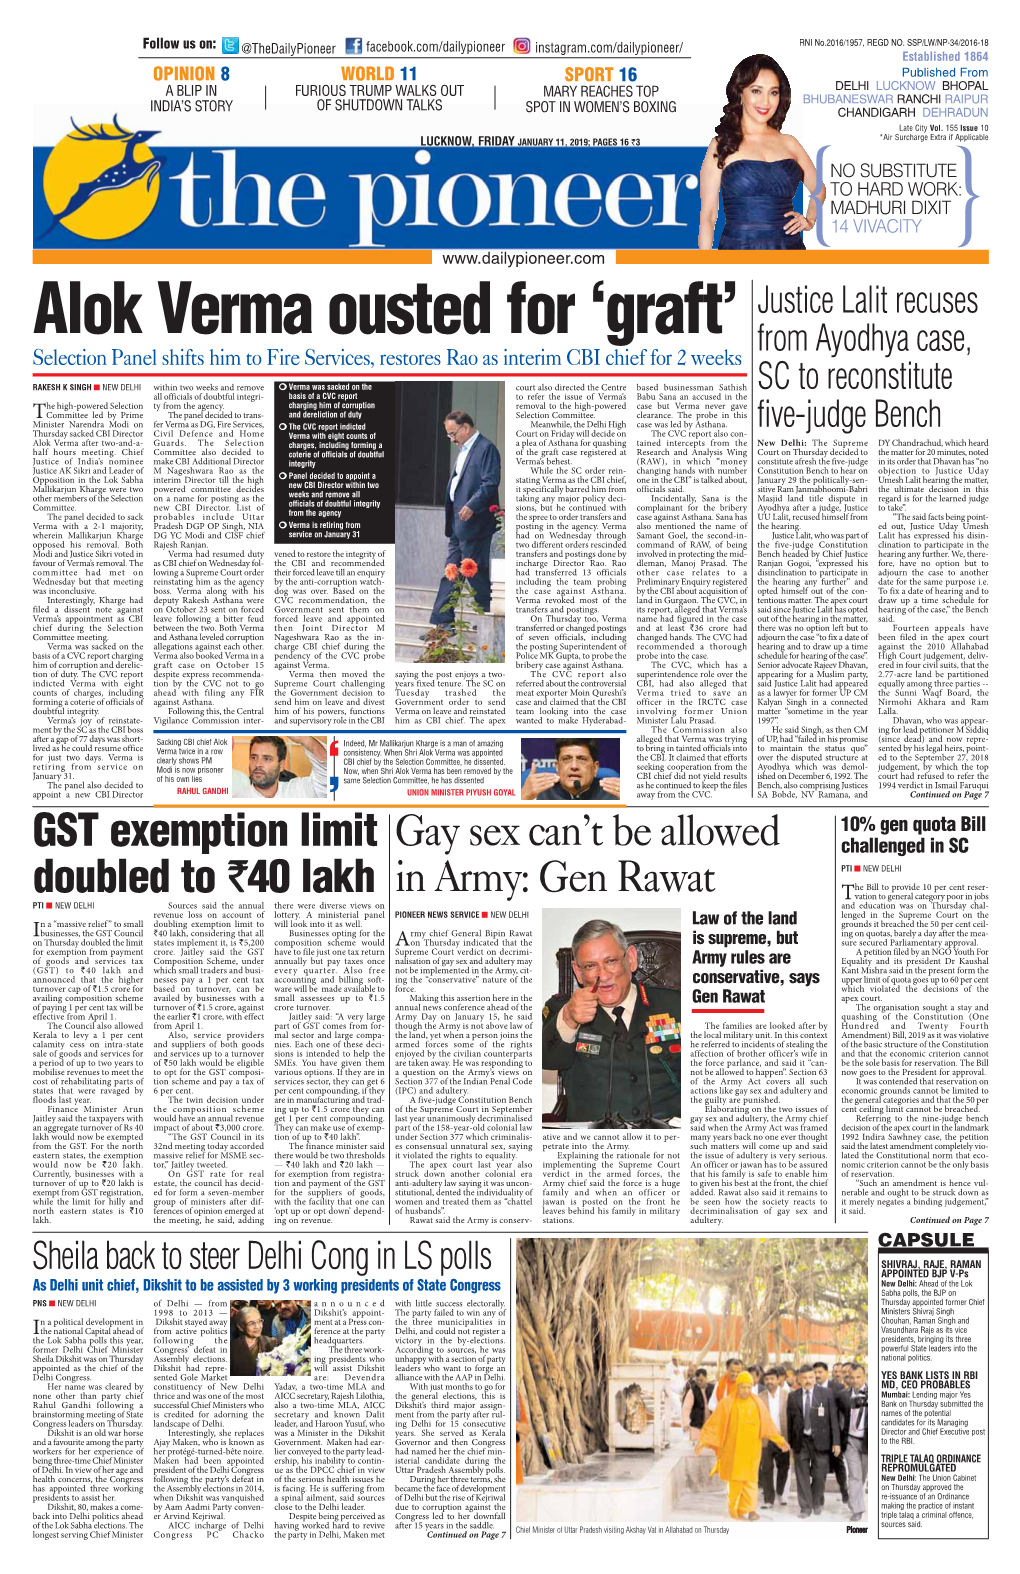 Alok Verma Ousted for ‘Graft’ Justice Lalit Recuses Selection Panel Shifts Him to Fire Services, Restores Rao As Interim CBI Chief for 2 Weeks from Ayodhya Case